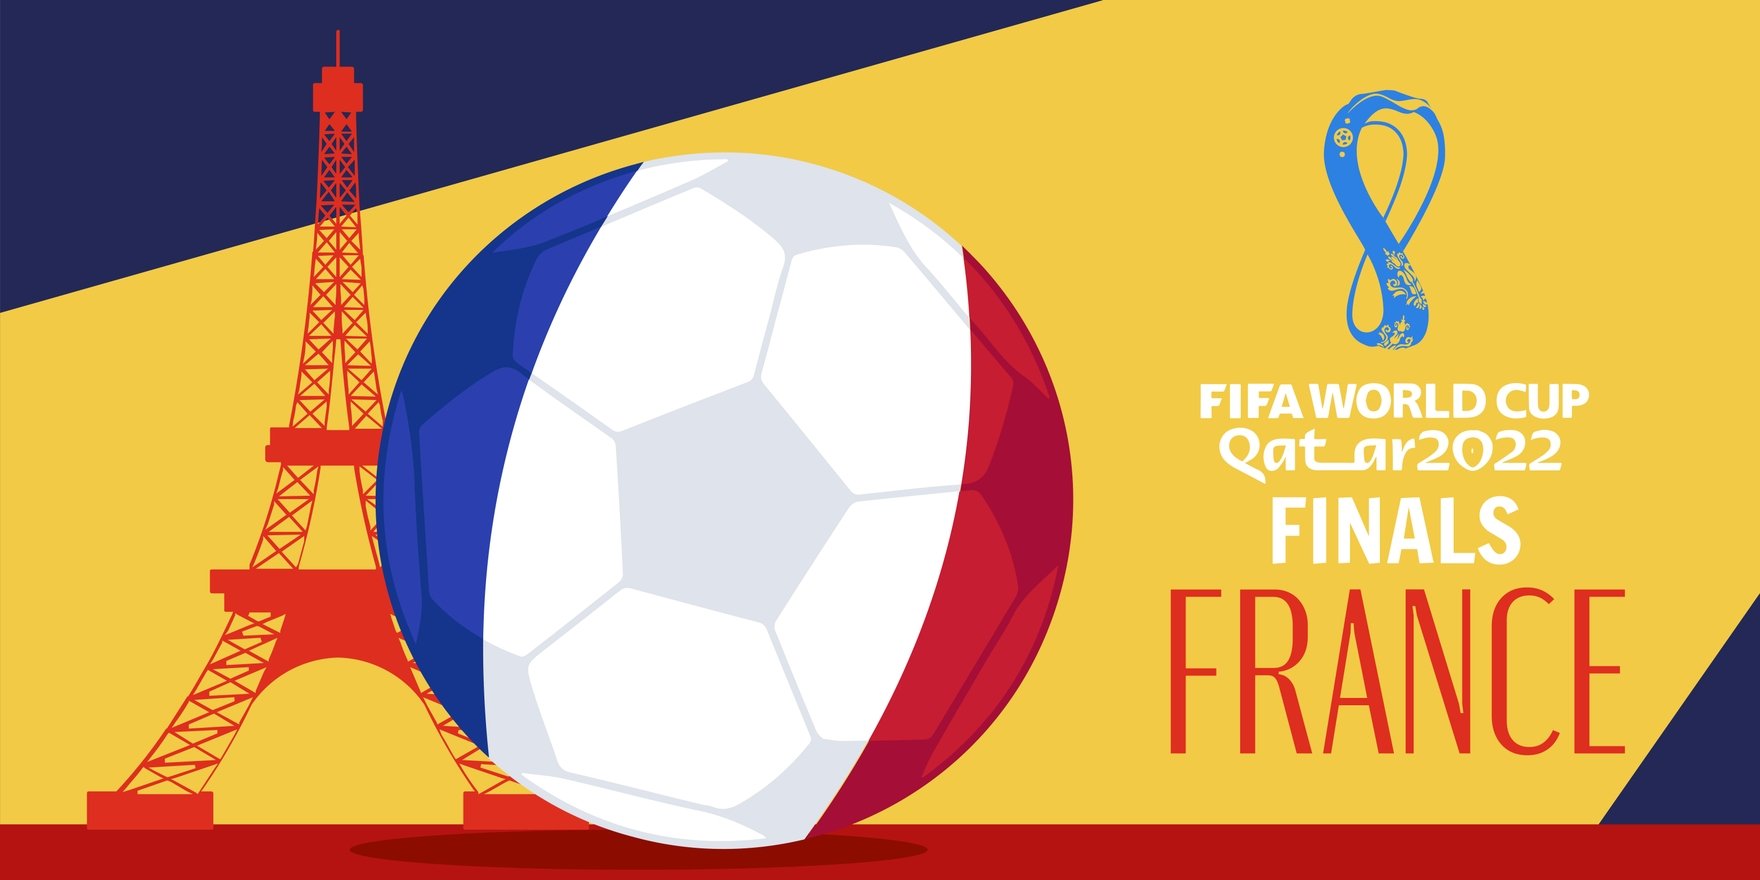 Free FIFA World Cup 2022 France Finals Banner in Illustrator, PSD, JPG, PNG